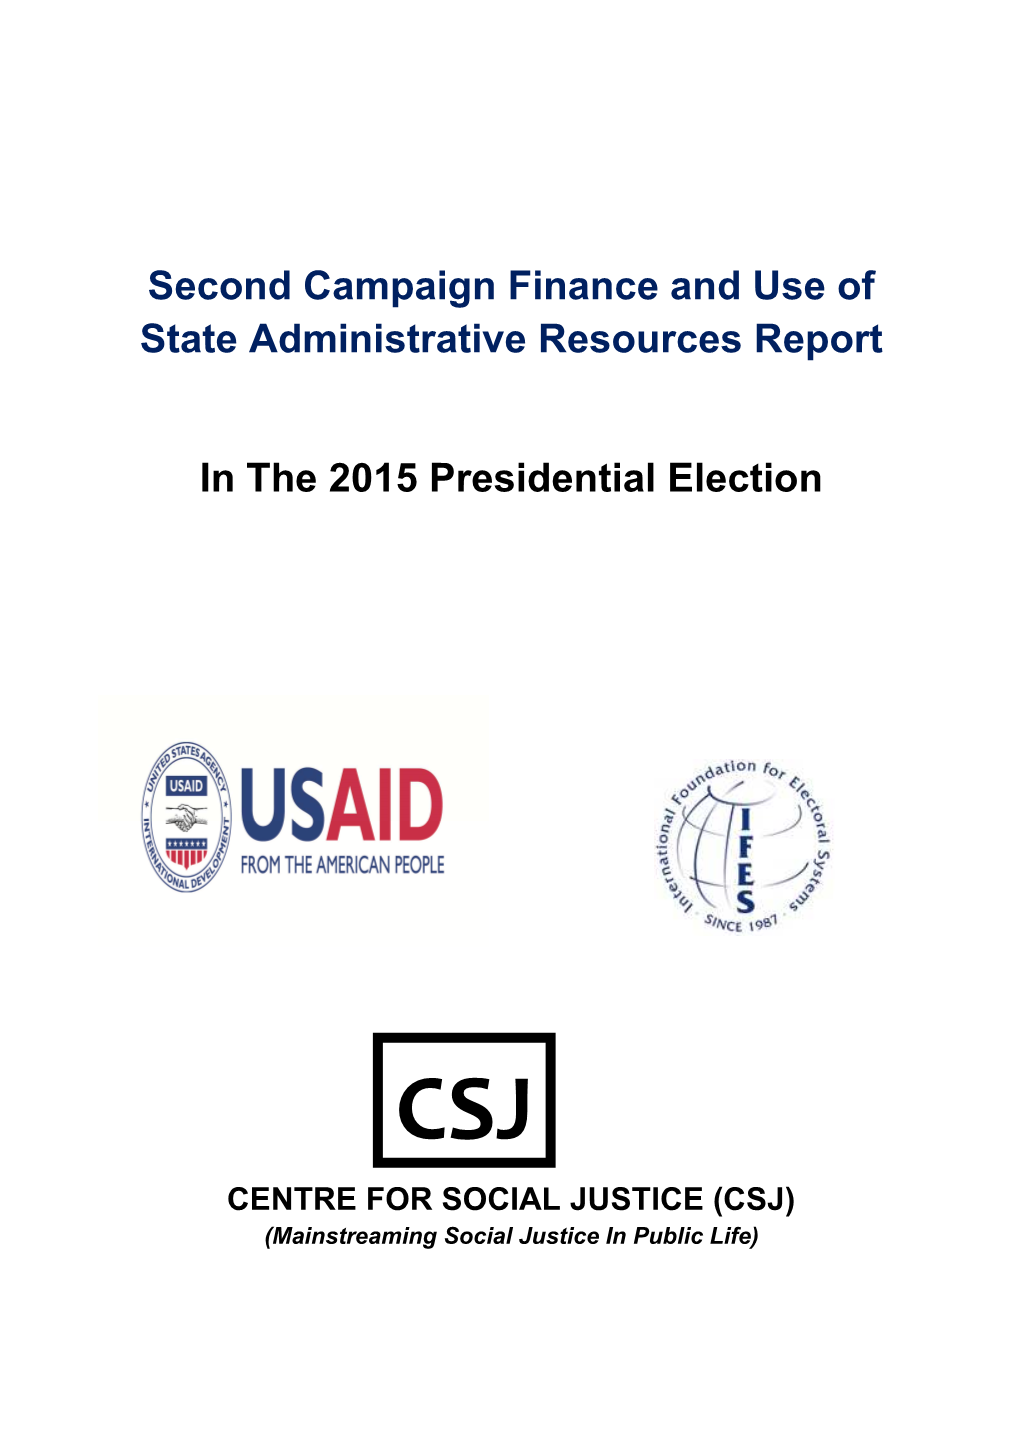 Second Campaign Finance and Use of State Administrative Resources Report